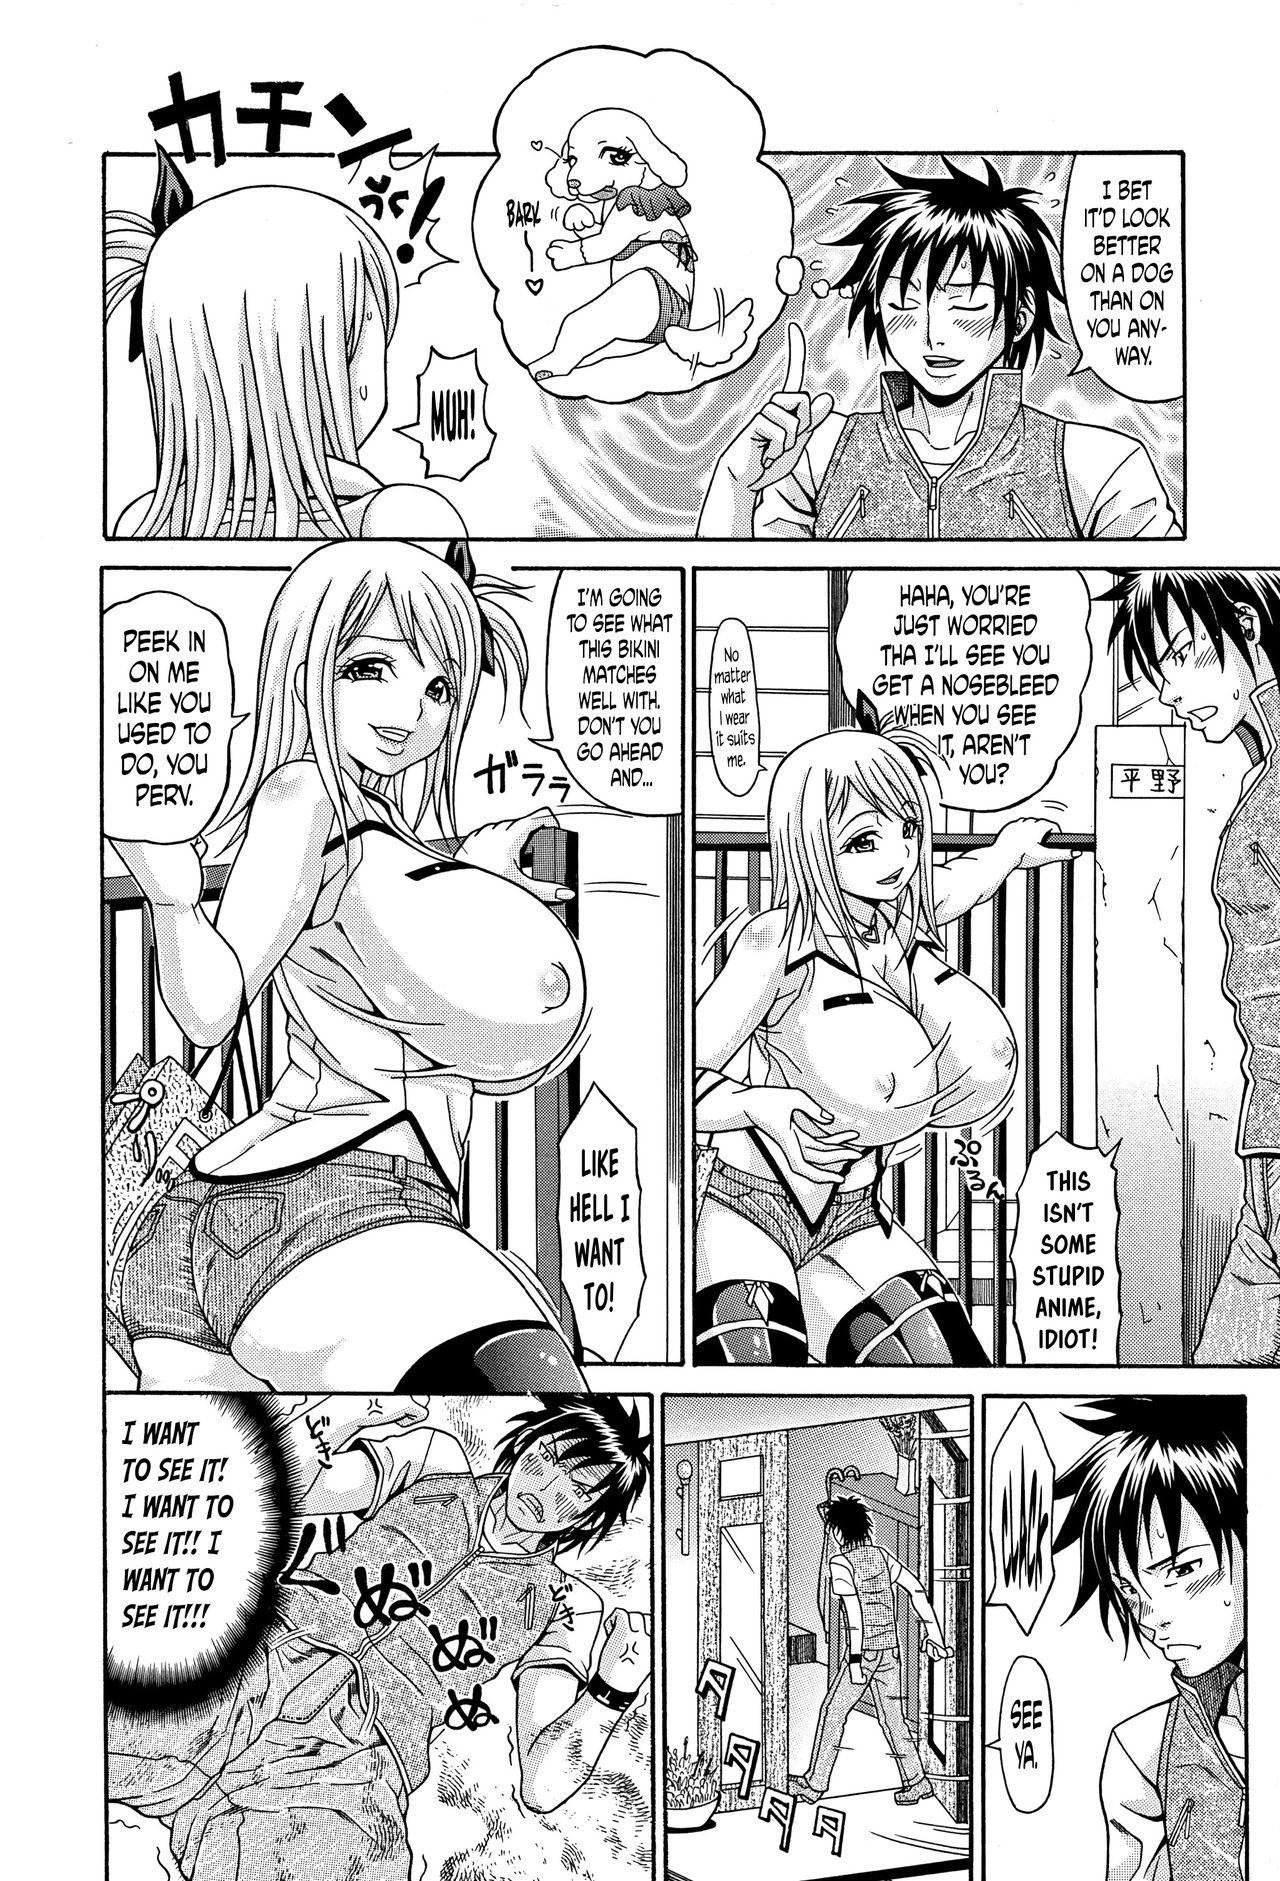 [Andou Hiroyuki] Mamire Chichi - Sticky Tits Feel Hot All Over. Ch.1-3 [English] [doujin-moe.us] 39